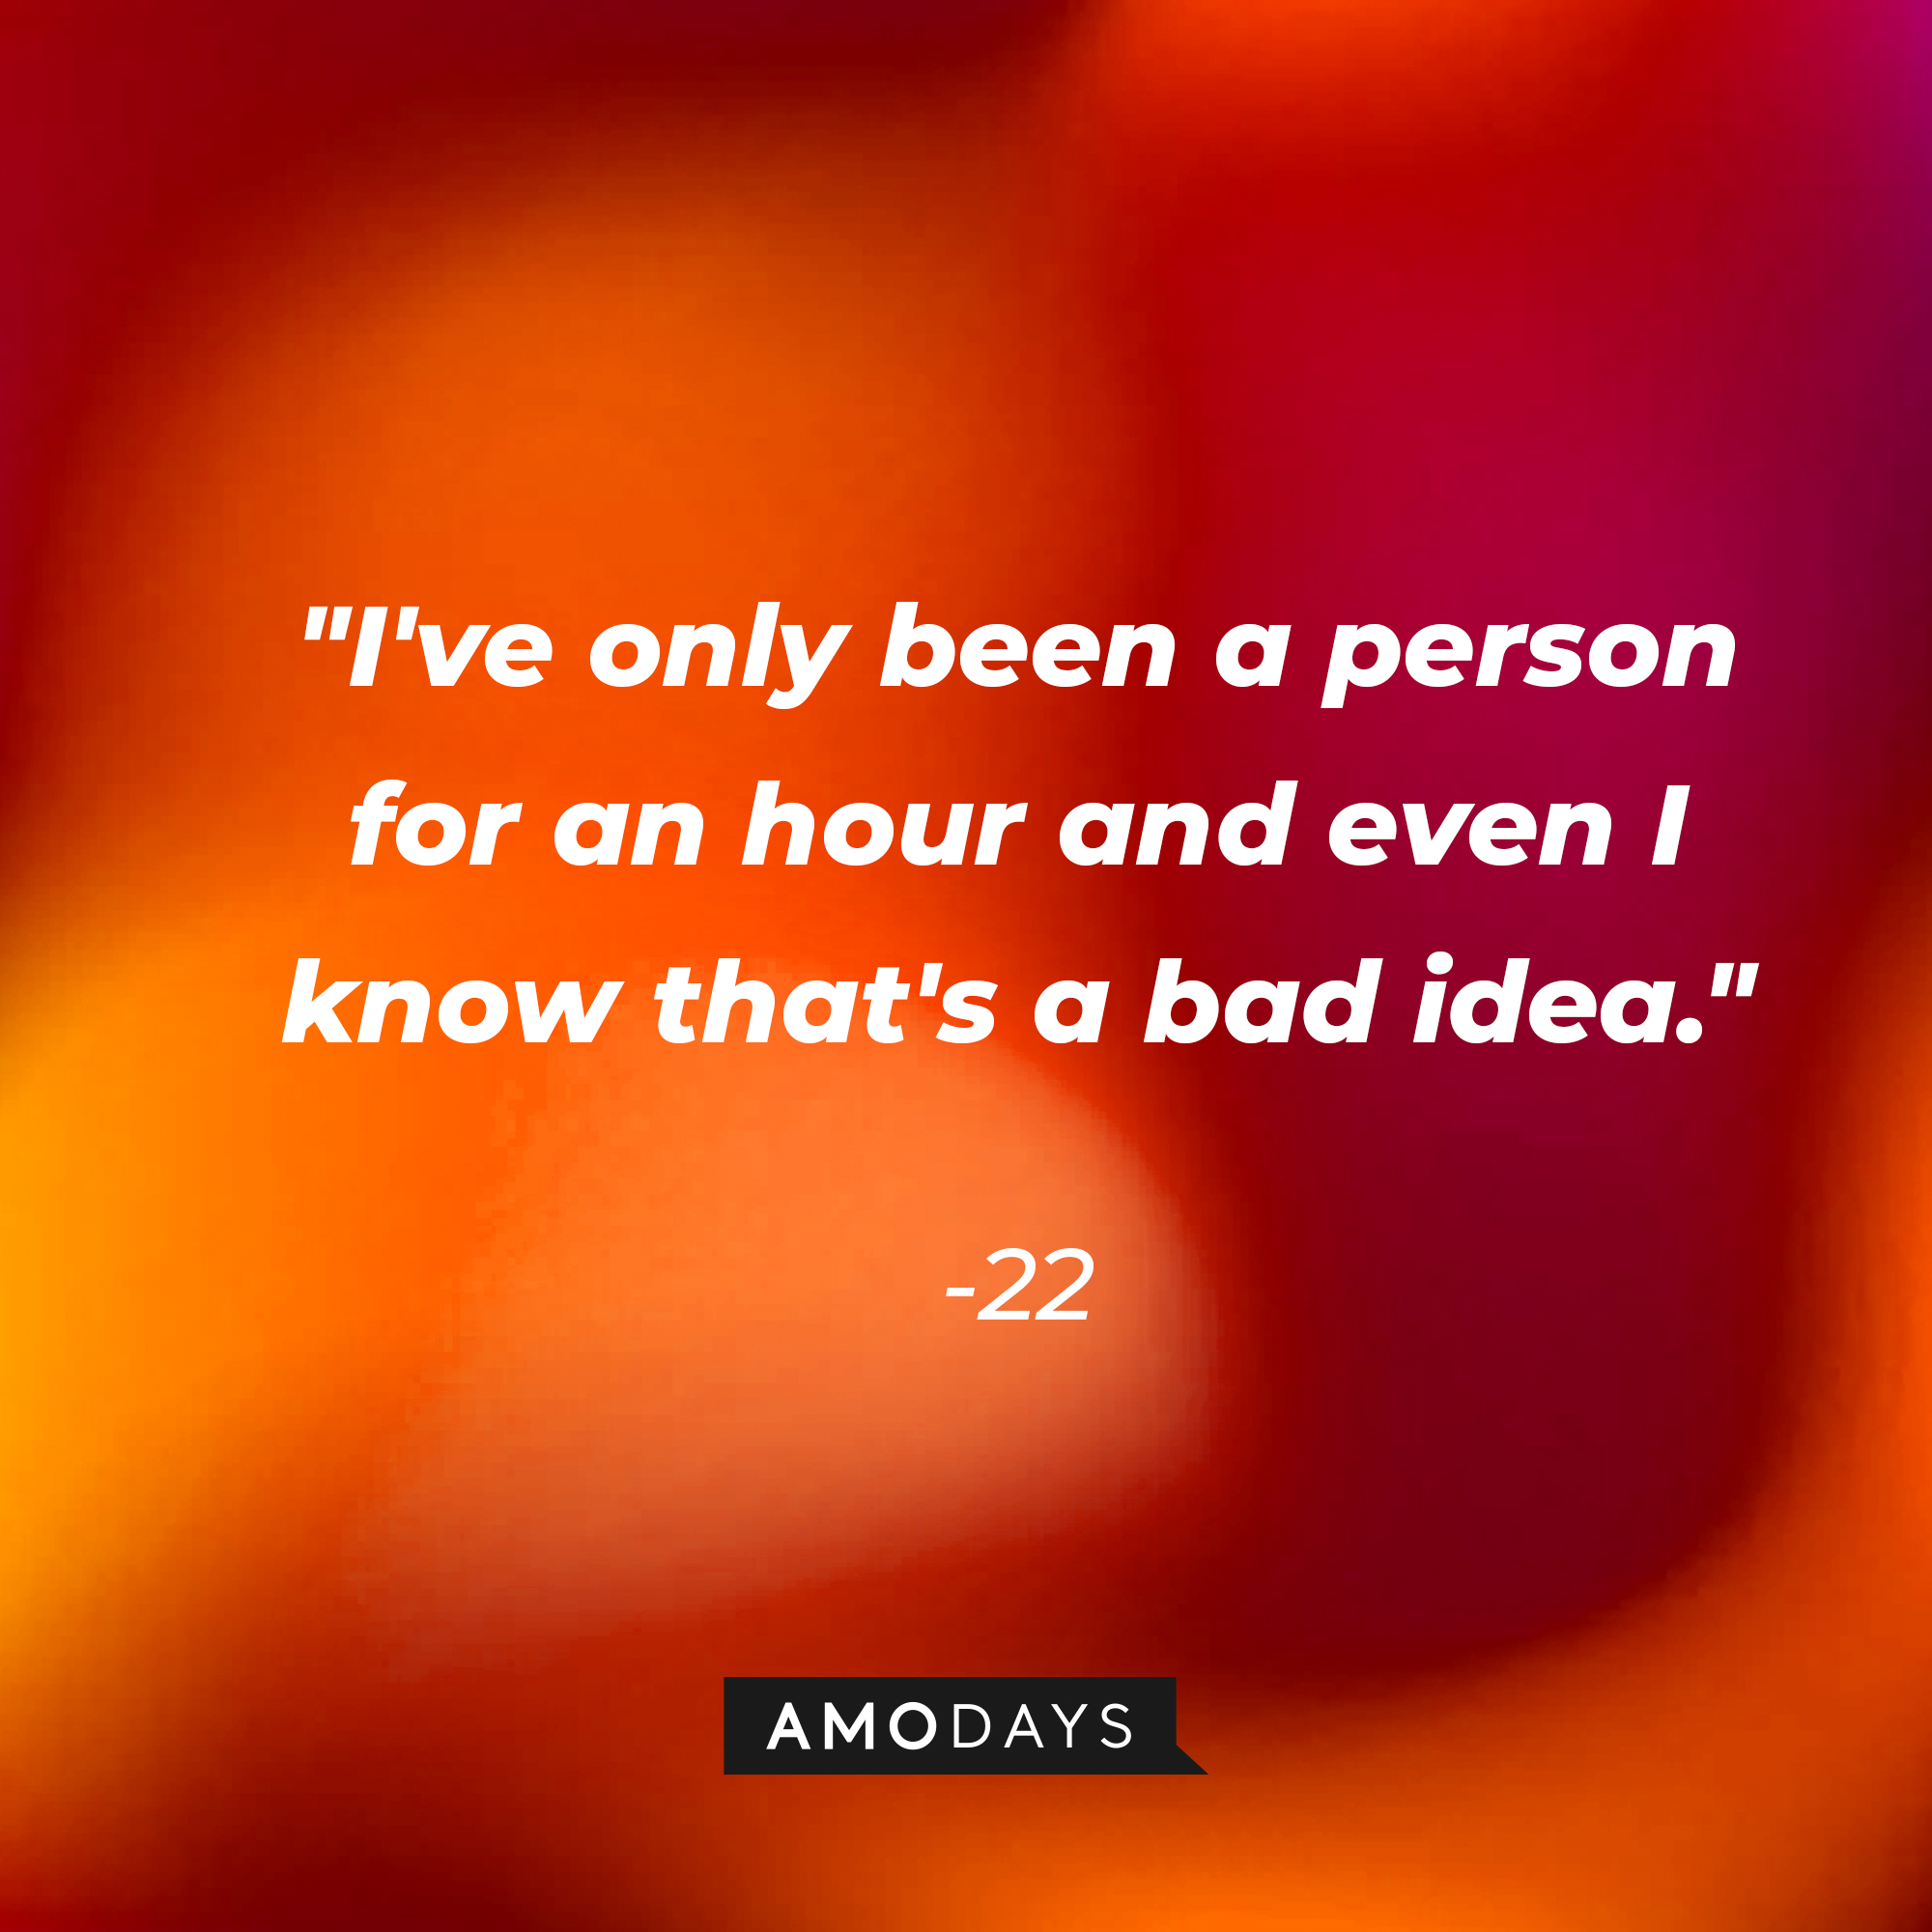 22's quote: "I've only been a person for an hour and even I know that's a bad idea." | Source: youtube.com/pixar